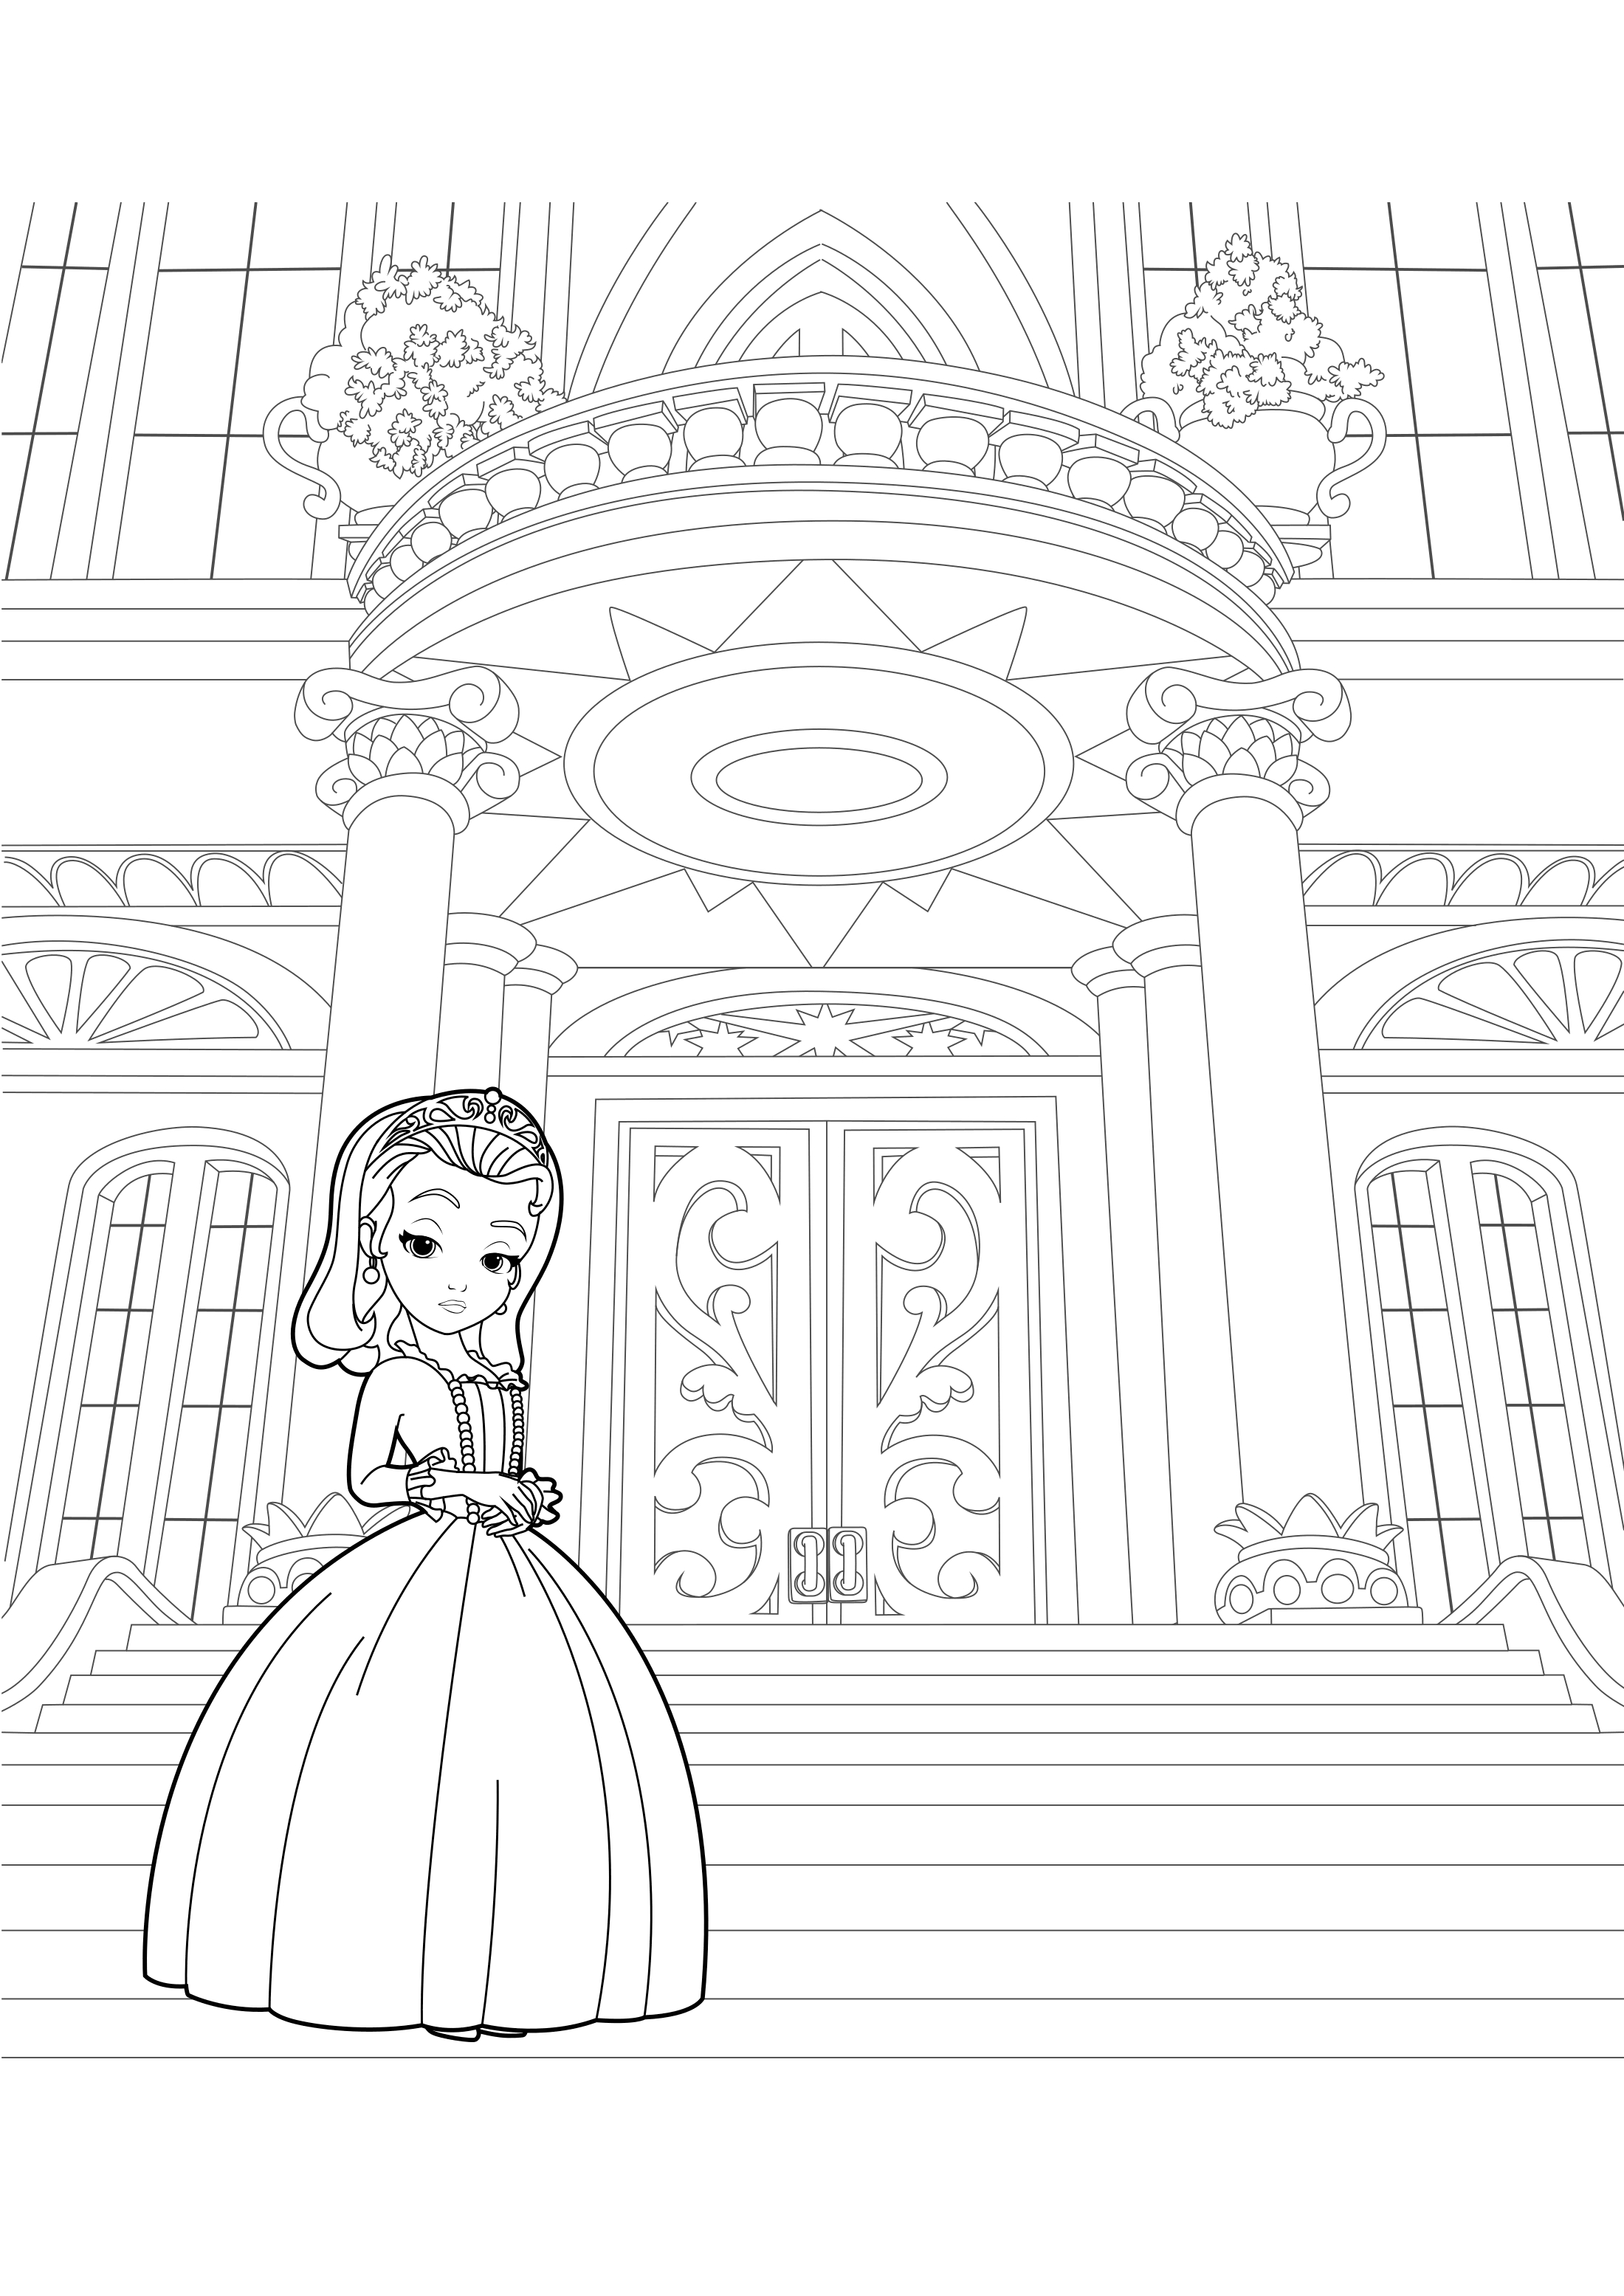 Coloring page Sofia the First Castle